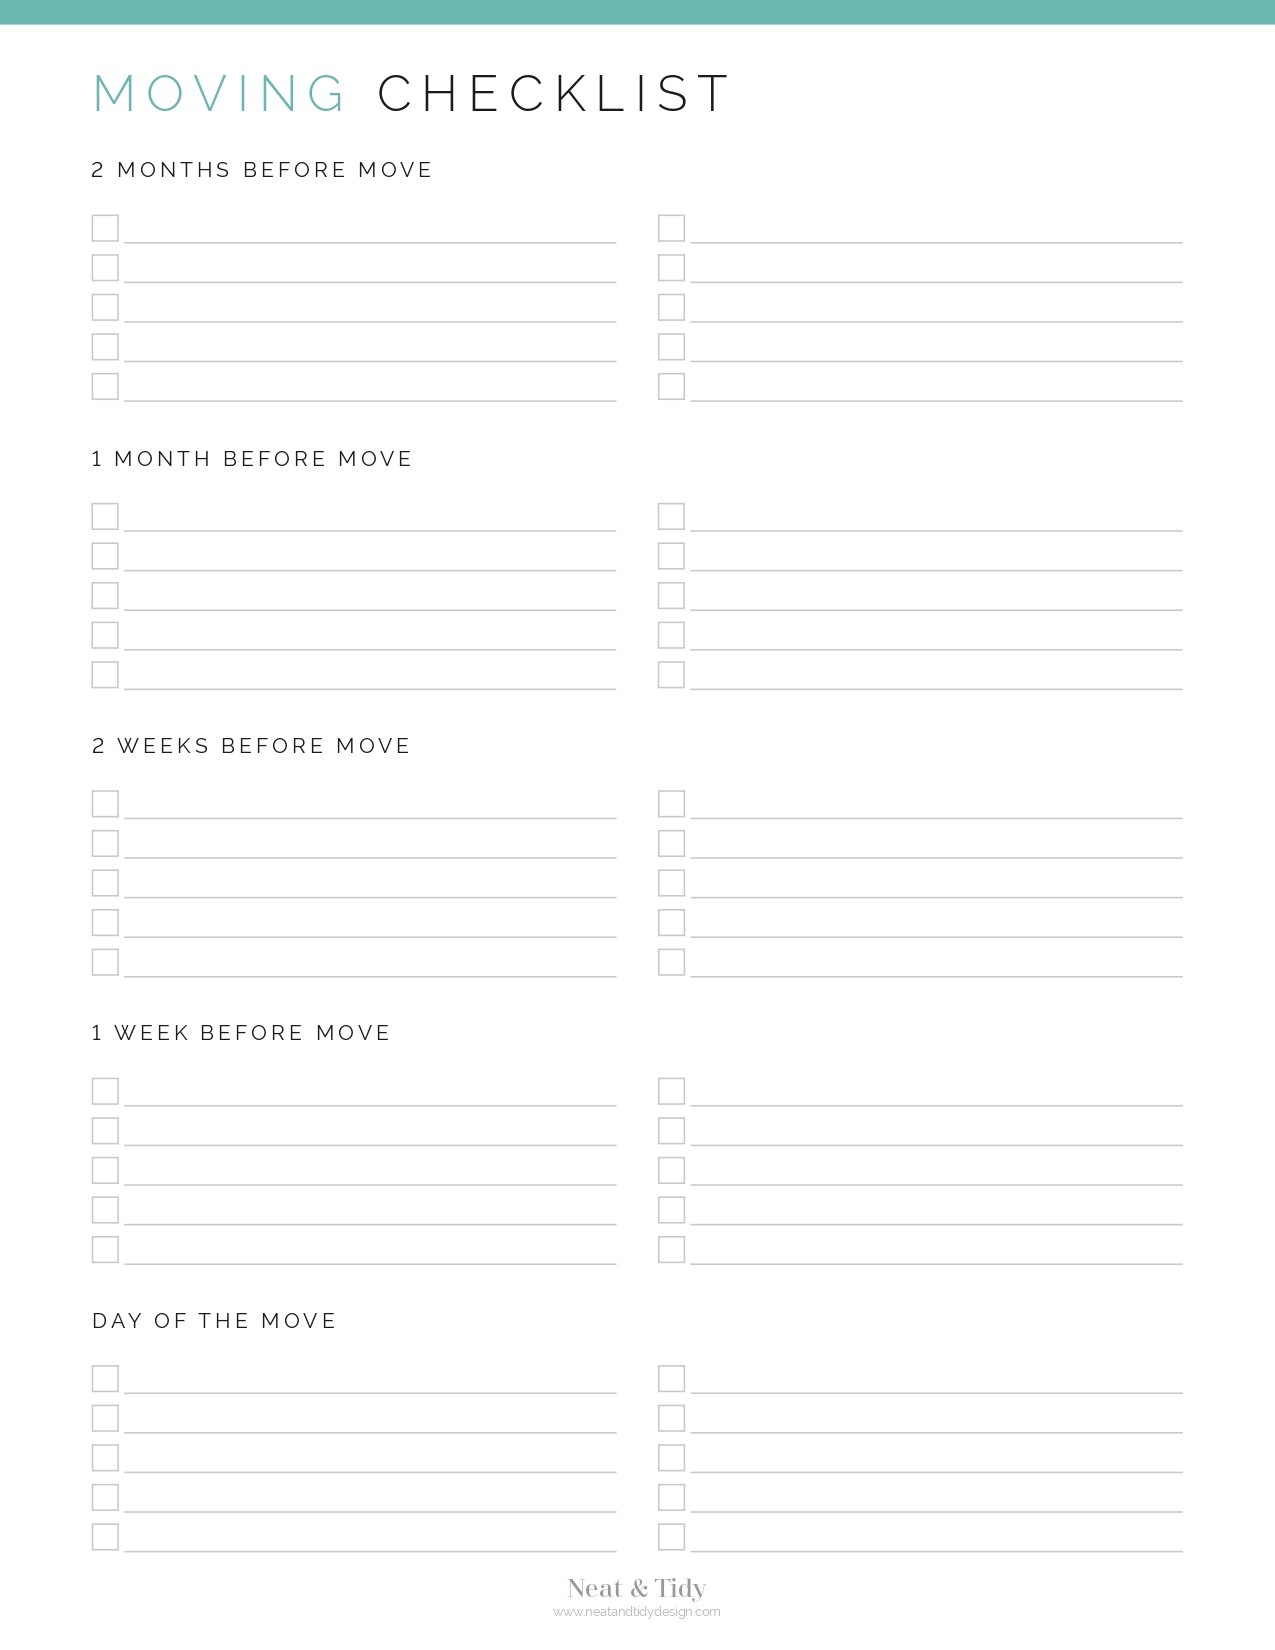 Moving Checklist Neat and Tidy Design